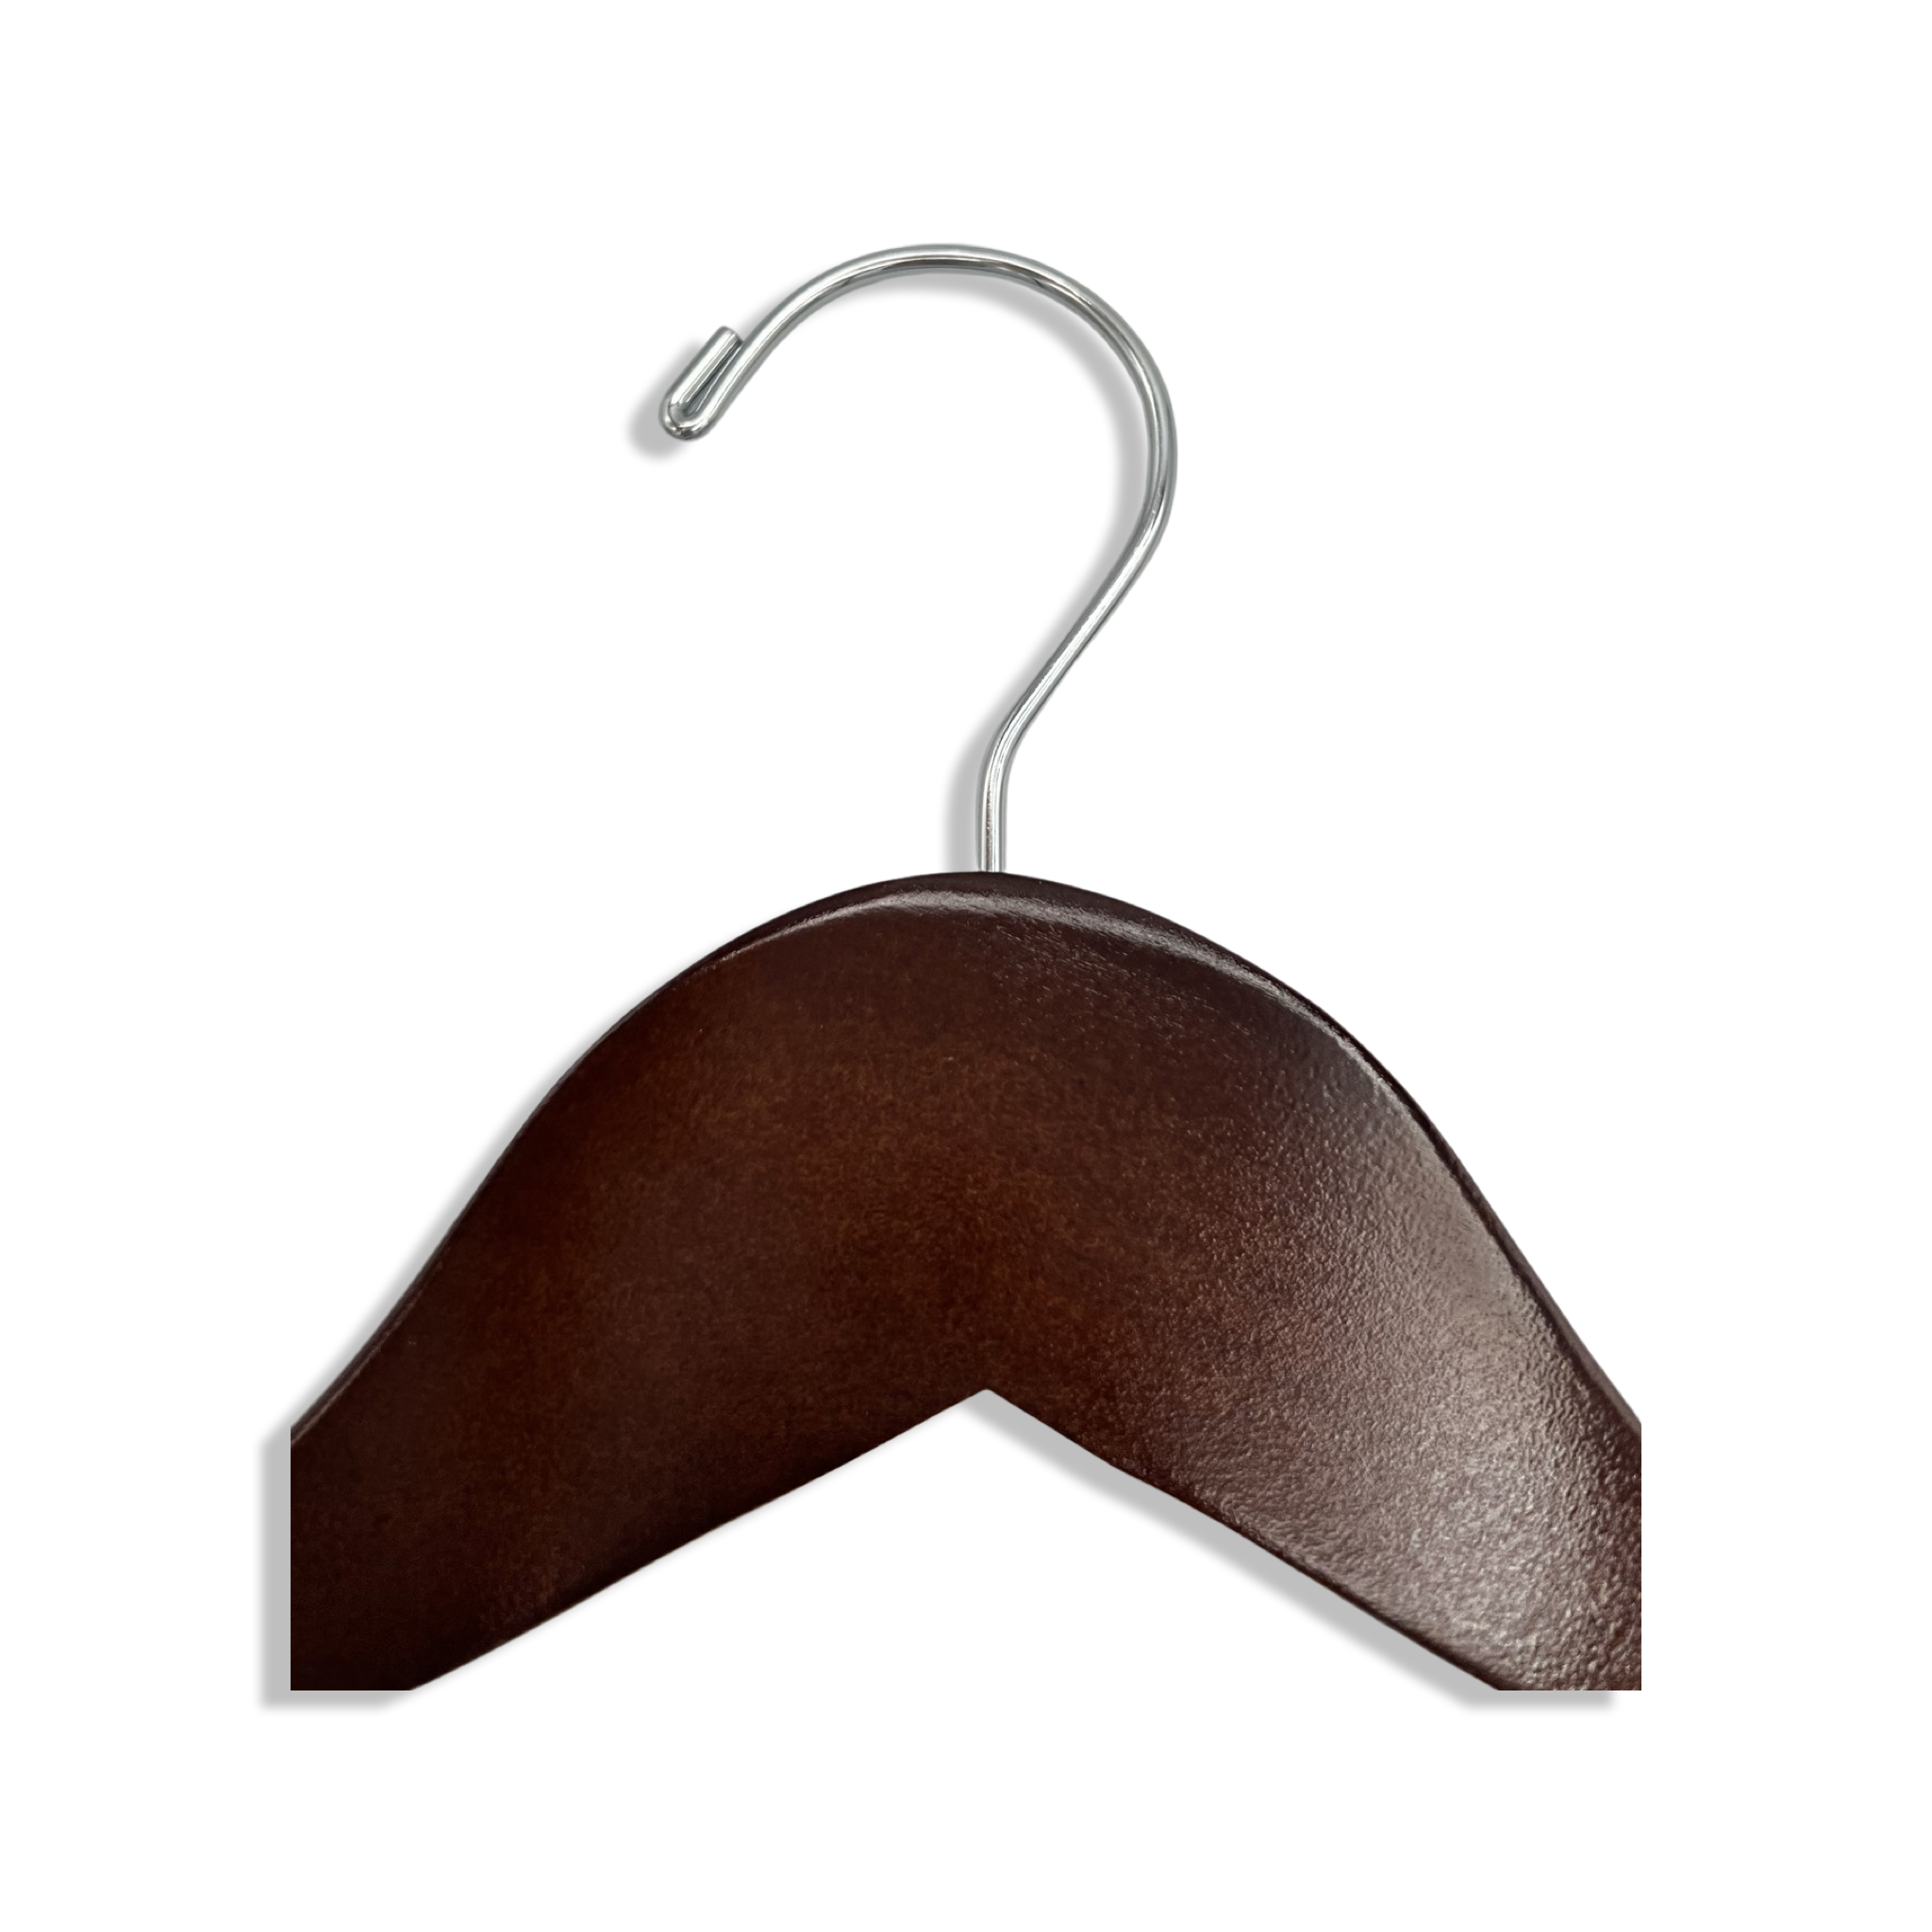 Top of Dark Walnut Wooden Clothes Hanger with a silver hook facing to the left #hook-color_silver-hook